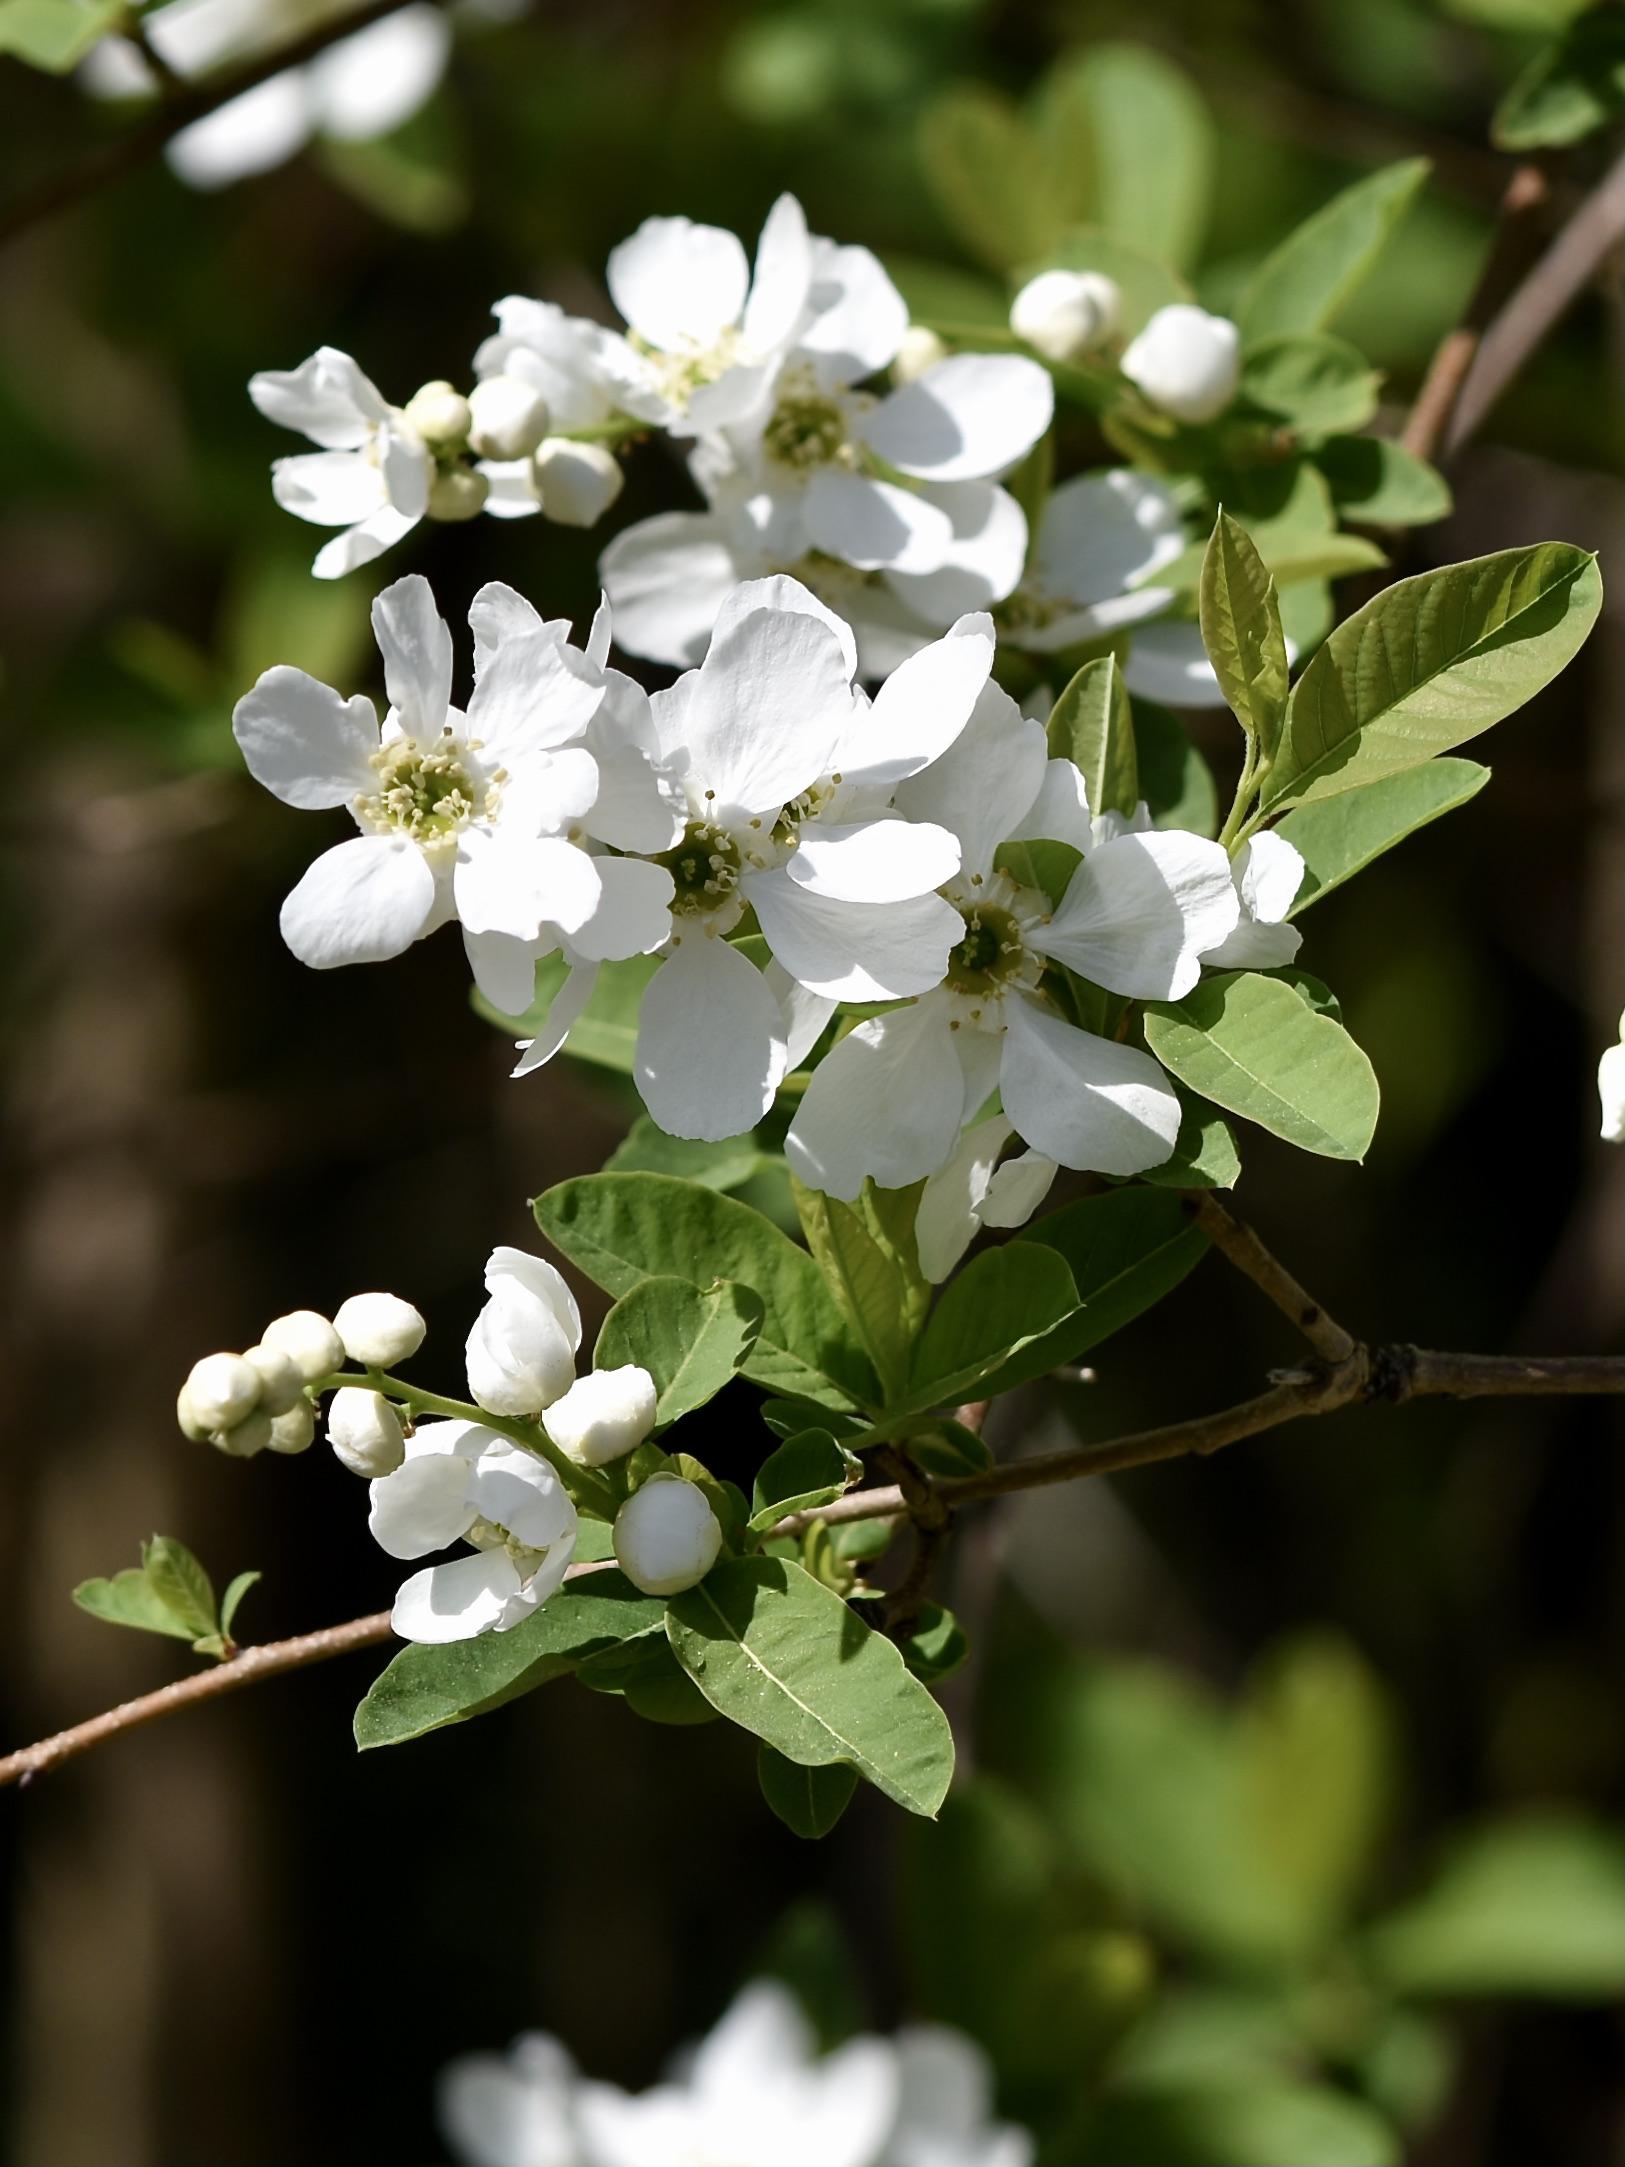 white flowers with olive center, off-white stamens, olive-green leaves and brown branches